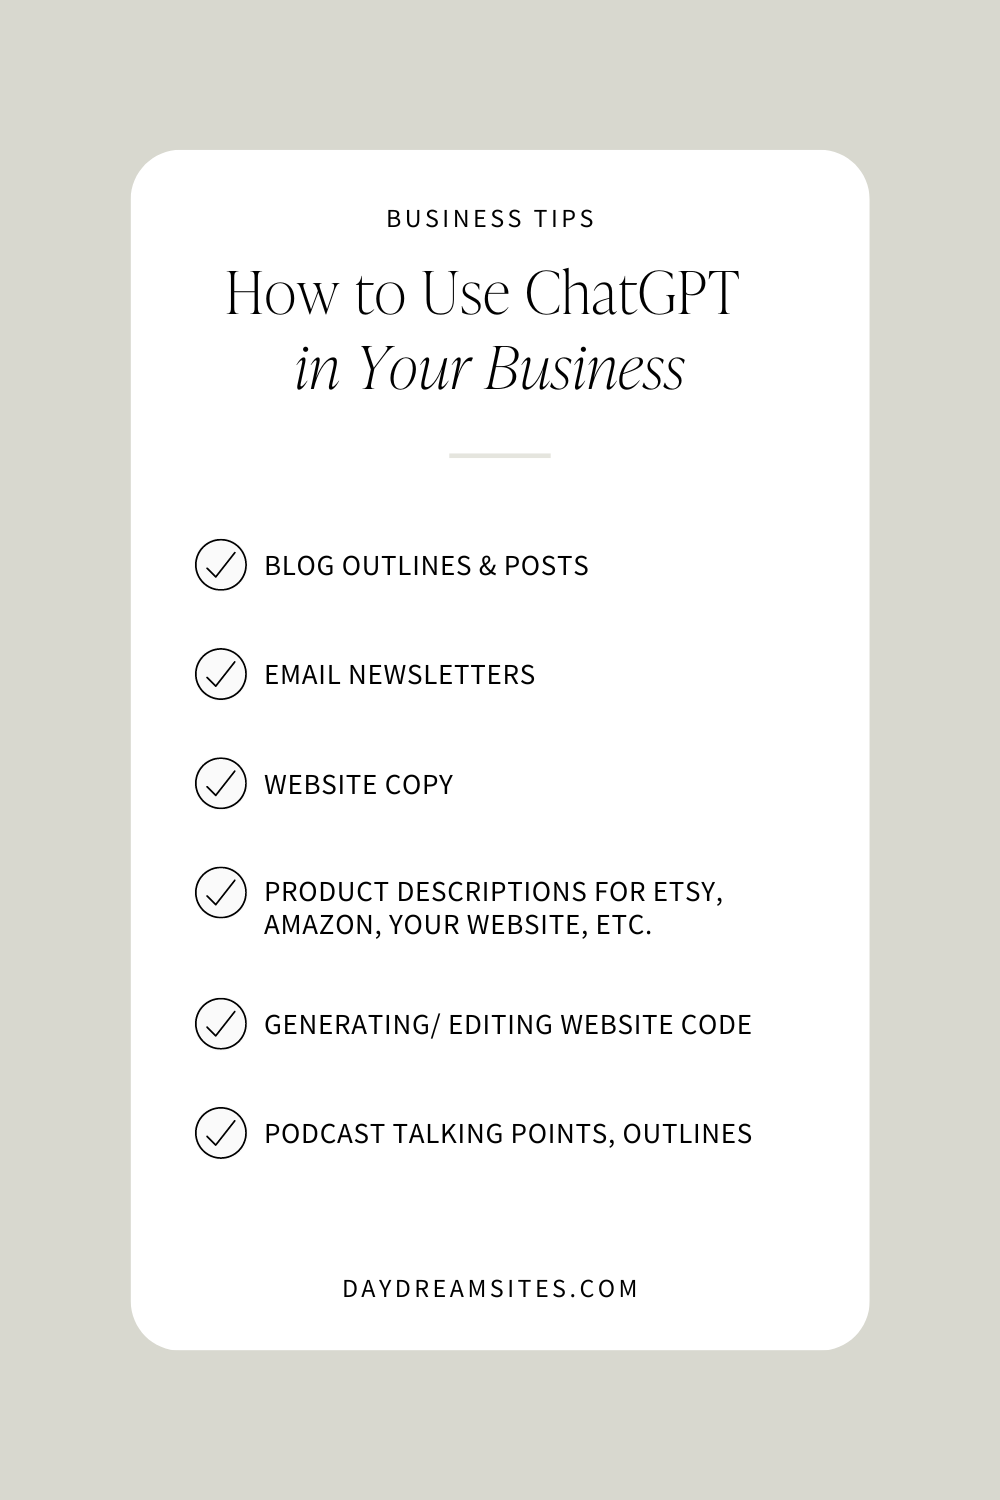 Ways to use ChatGPT in your business